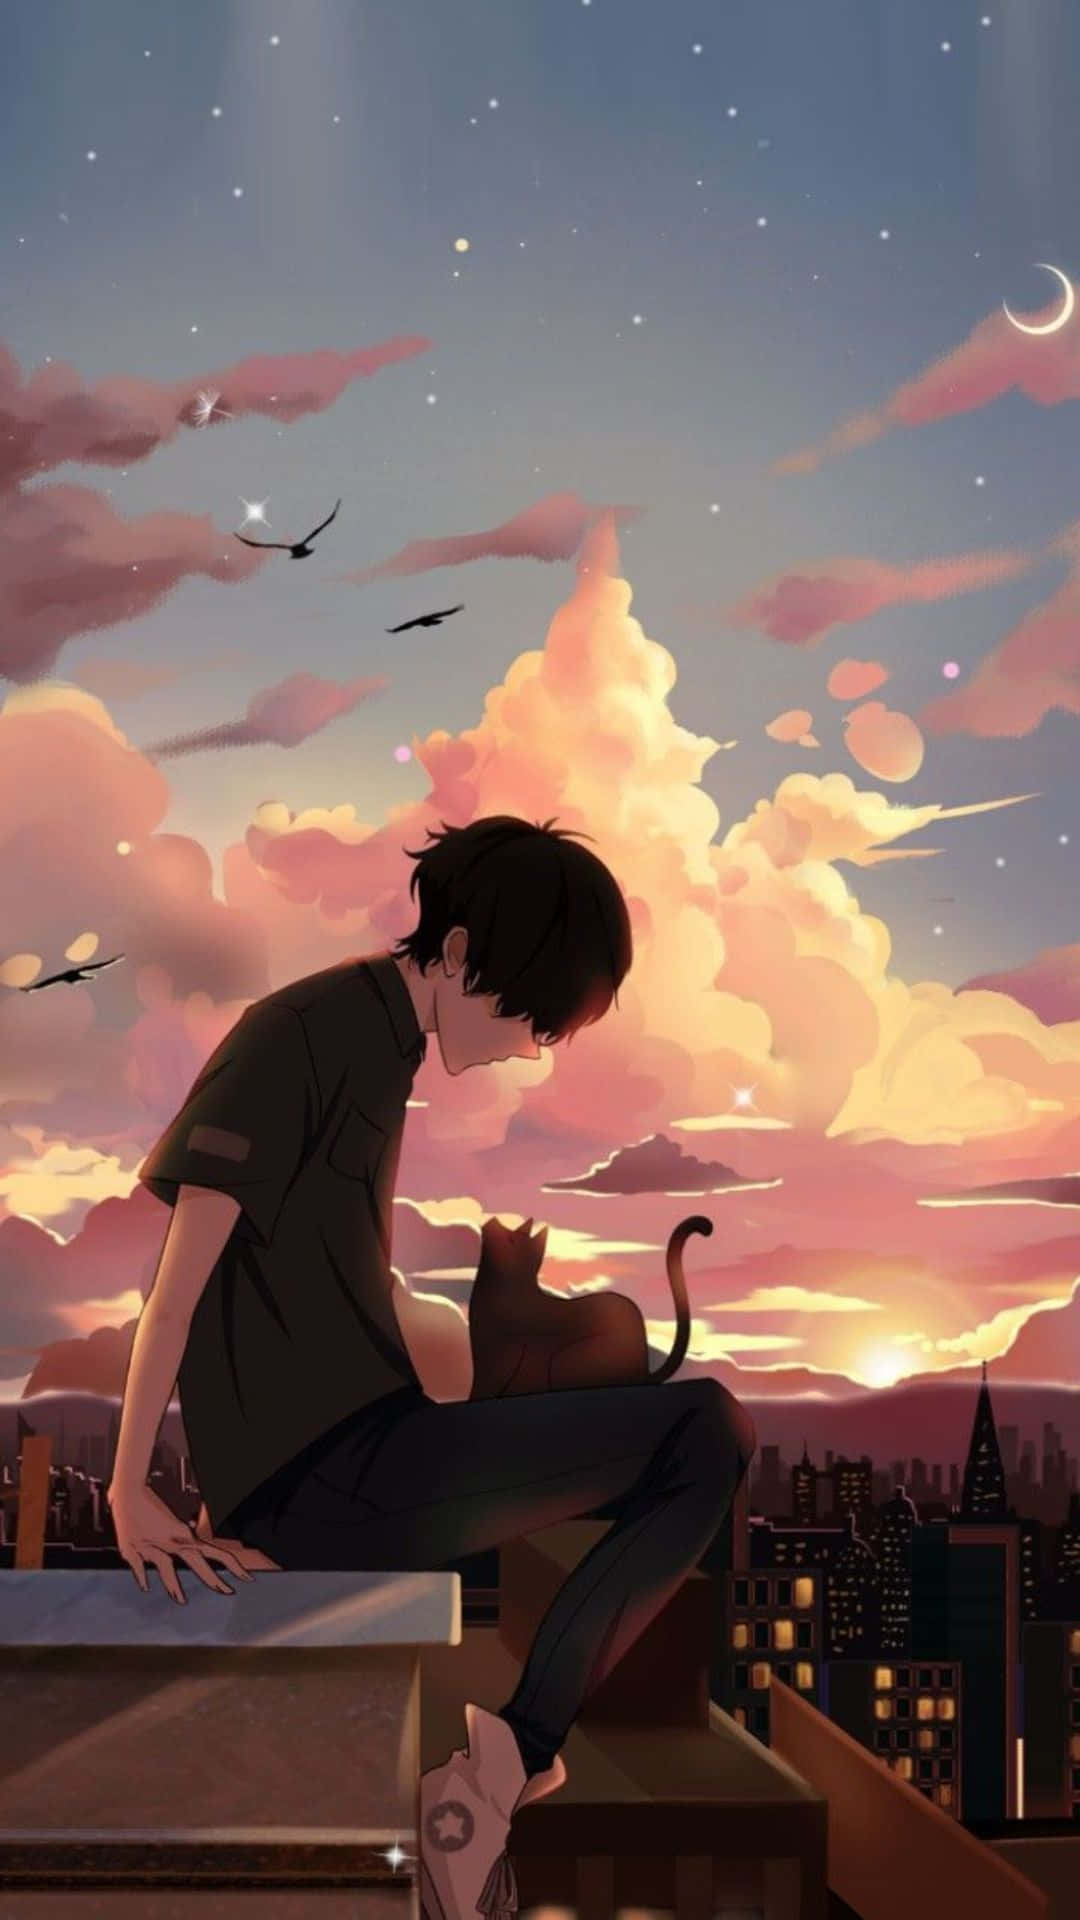 Anime Aesthetic Pfp Of A Guy With Cat Wallpaper